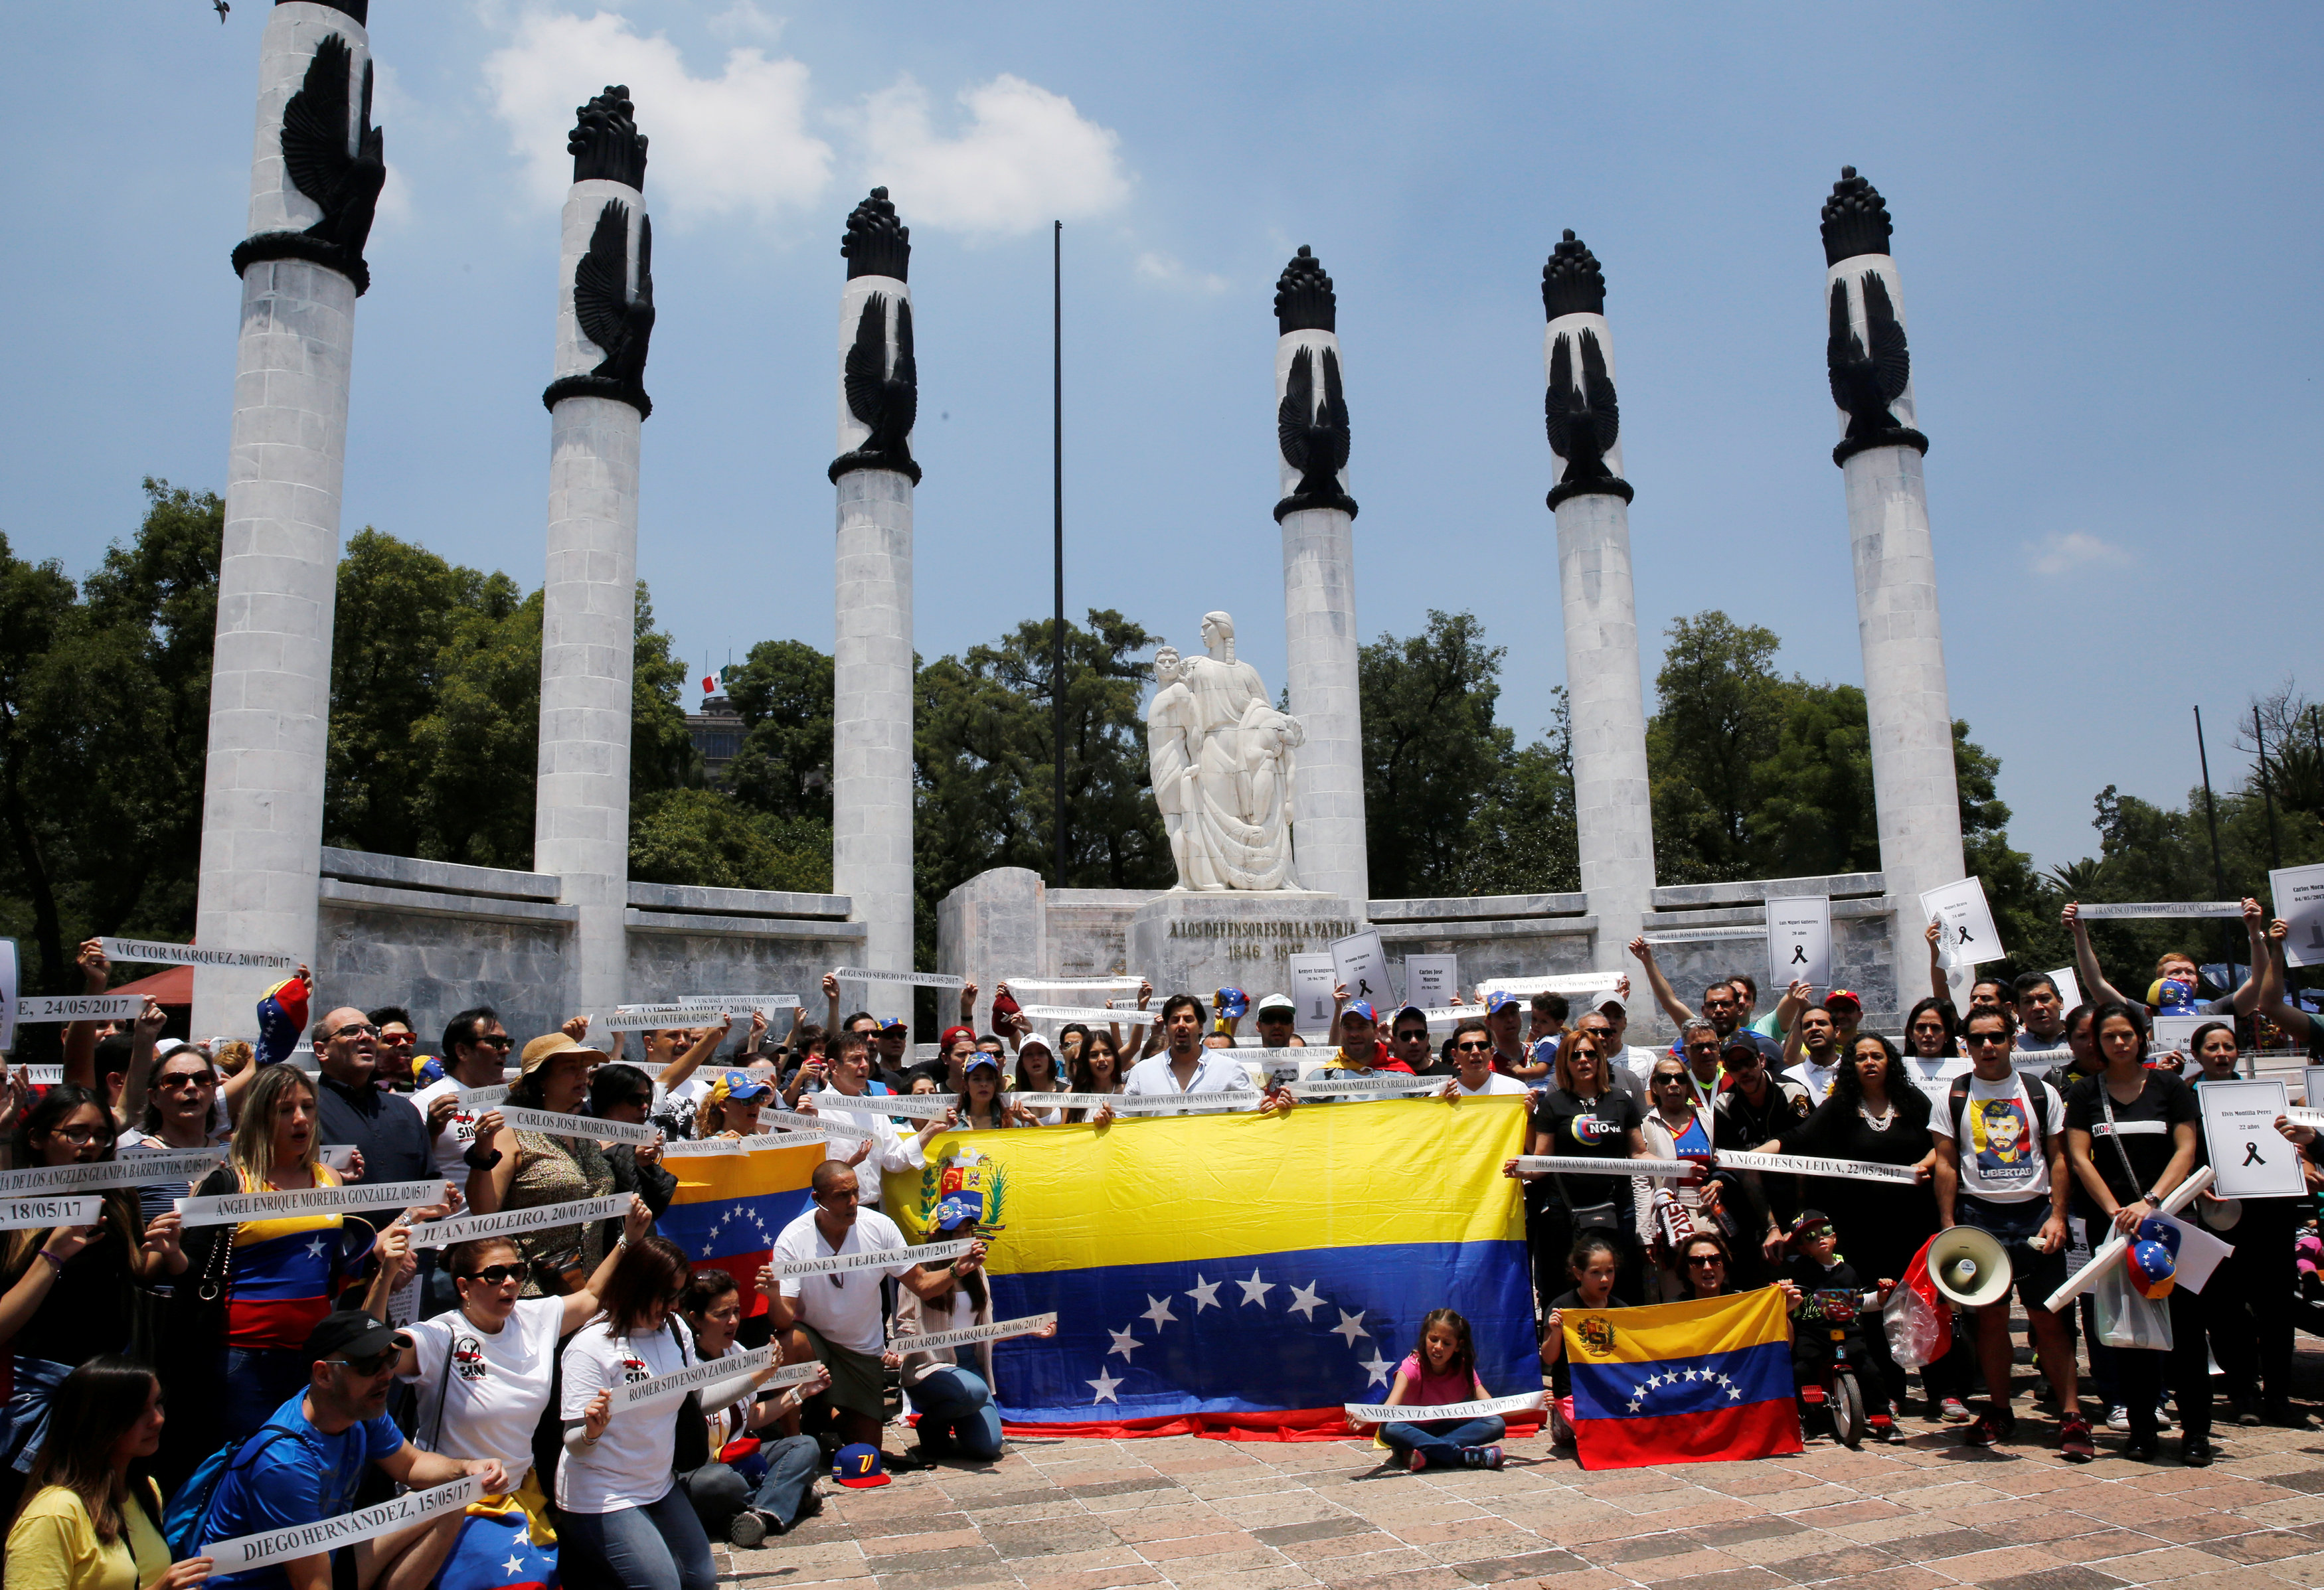 People hold Venezuela flags as they take part in a protest held by Venezuelans in Mexico against Venezuela's Constituent Assembly election, at the Heroic Children monument in Mexico City, Mexico  July 30, 2017. REUTERS/Henry Romero